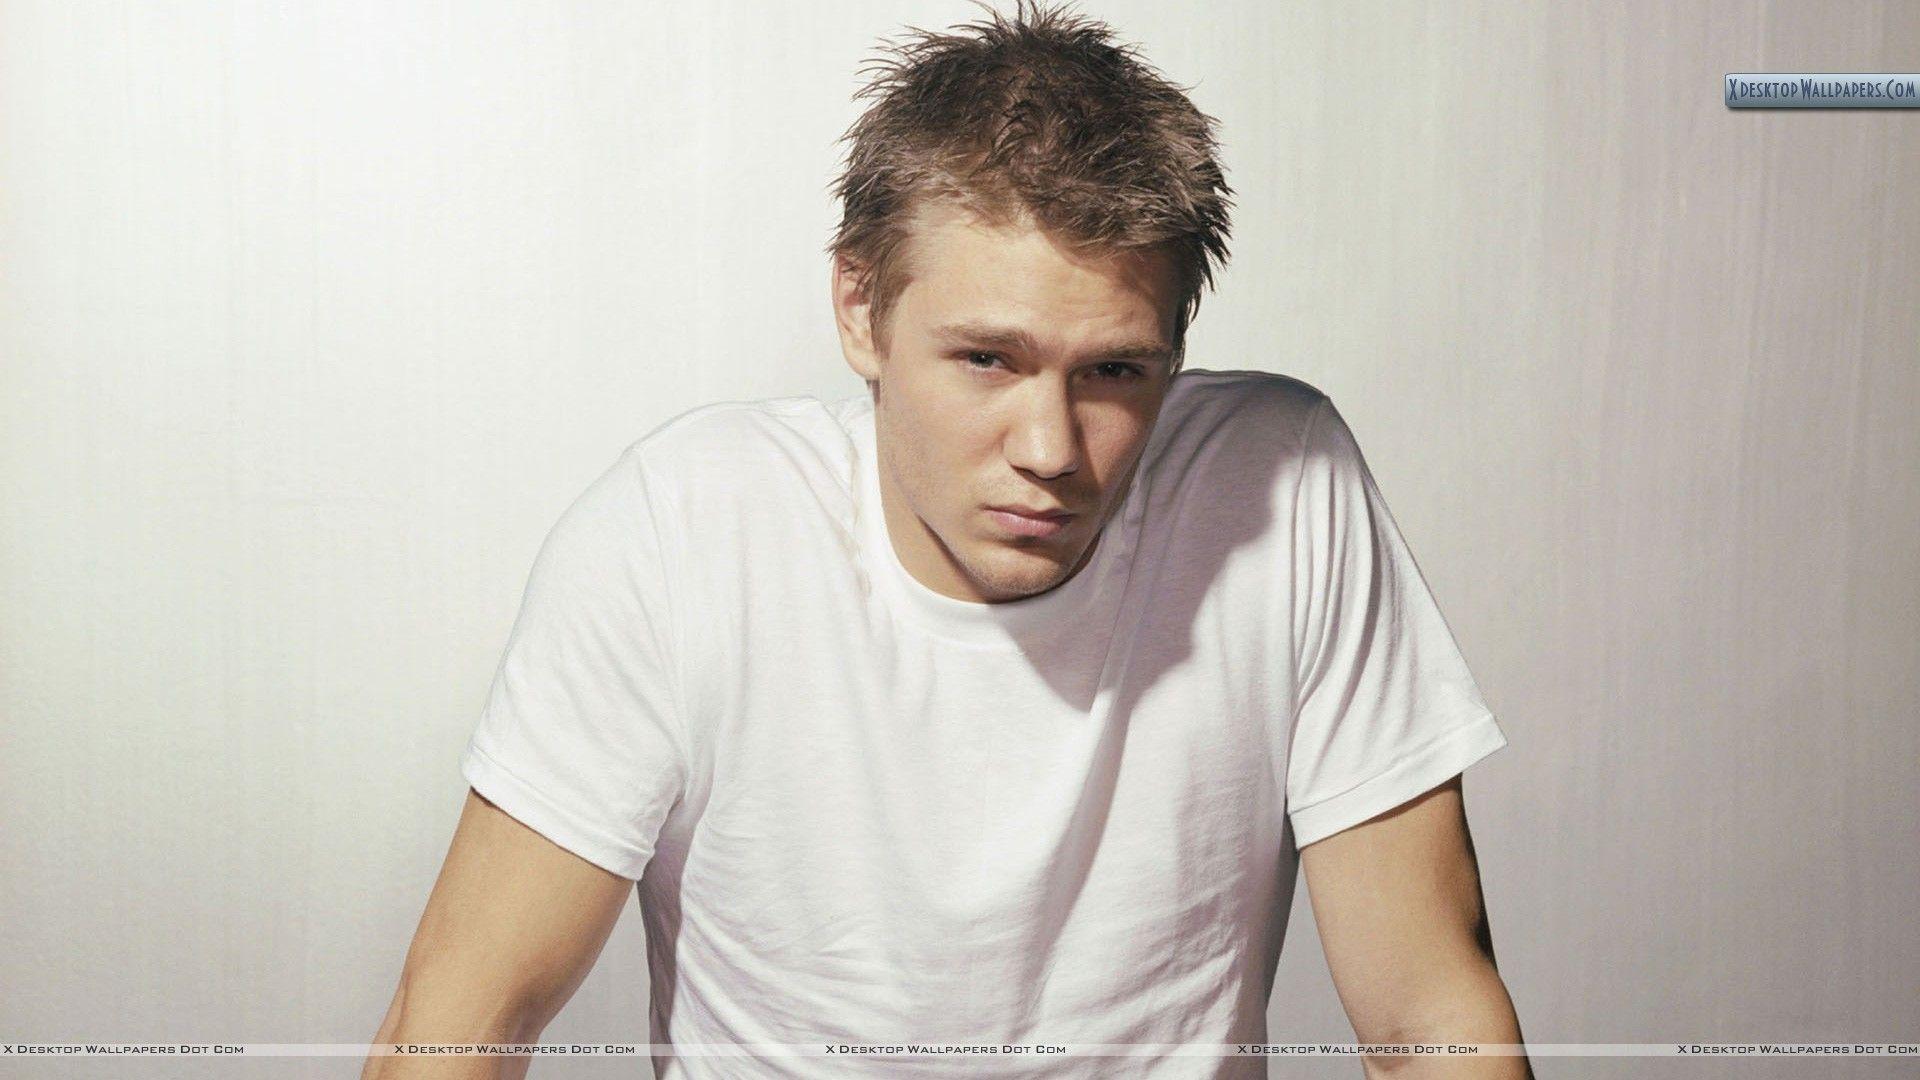 Chad Michael Murray Wallpaper, Photo & Image in HD